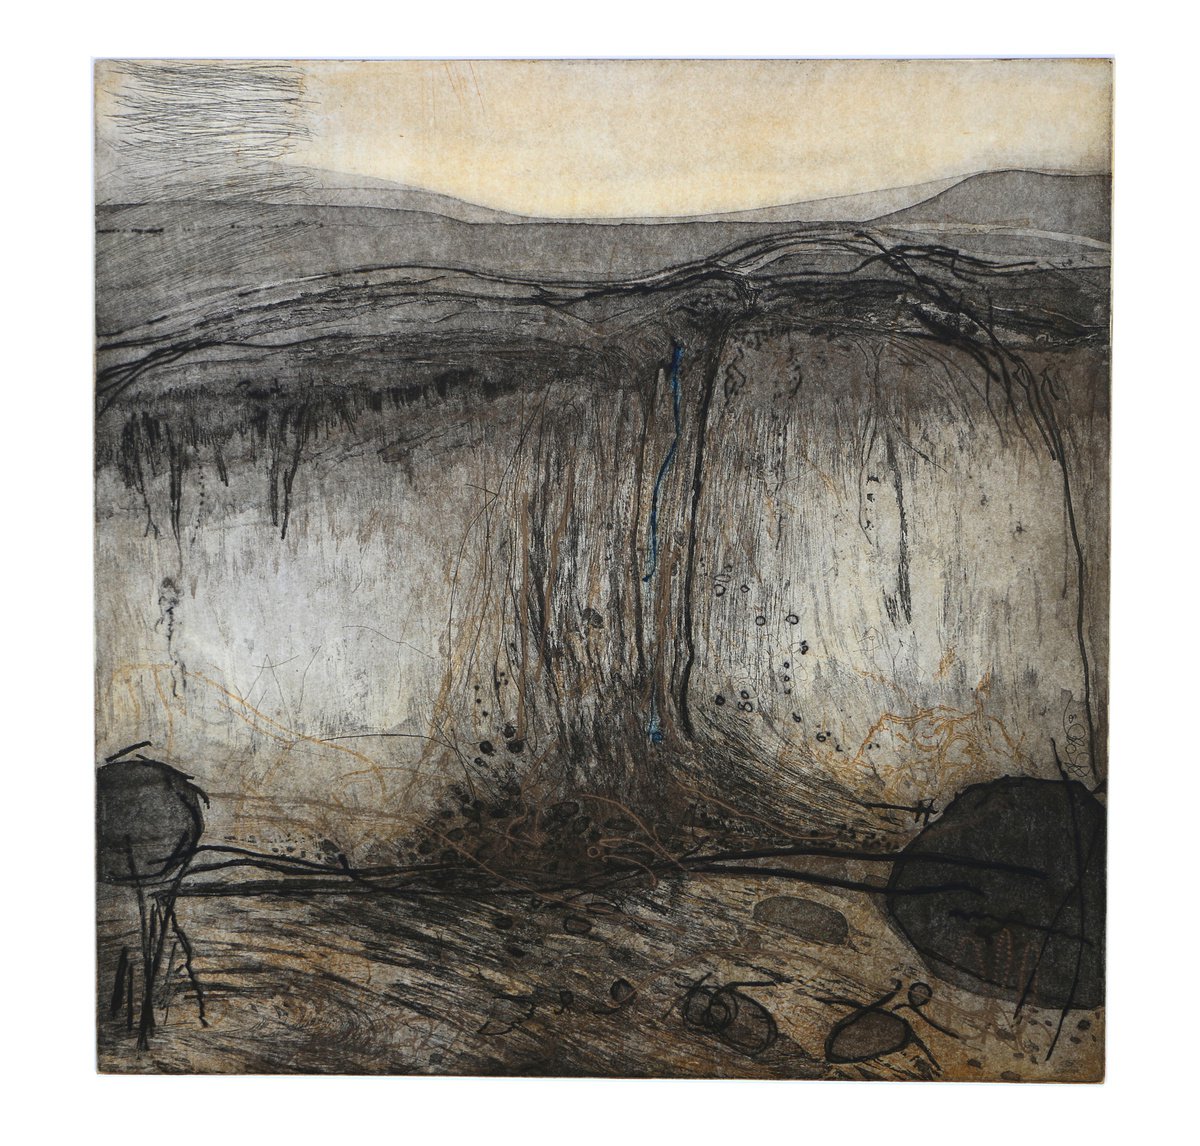 Heike Roesel Rockfall, etching in variation in edition of 15 by Heike Roesel